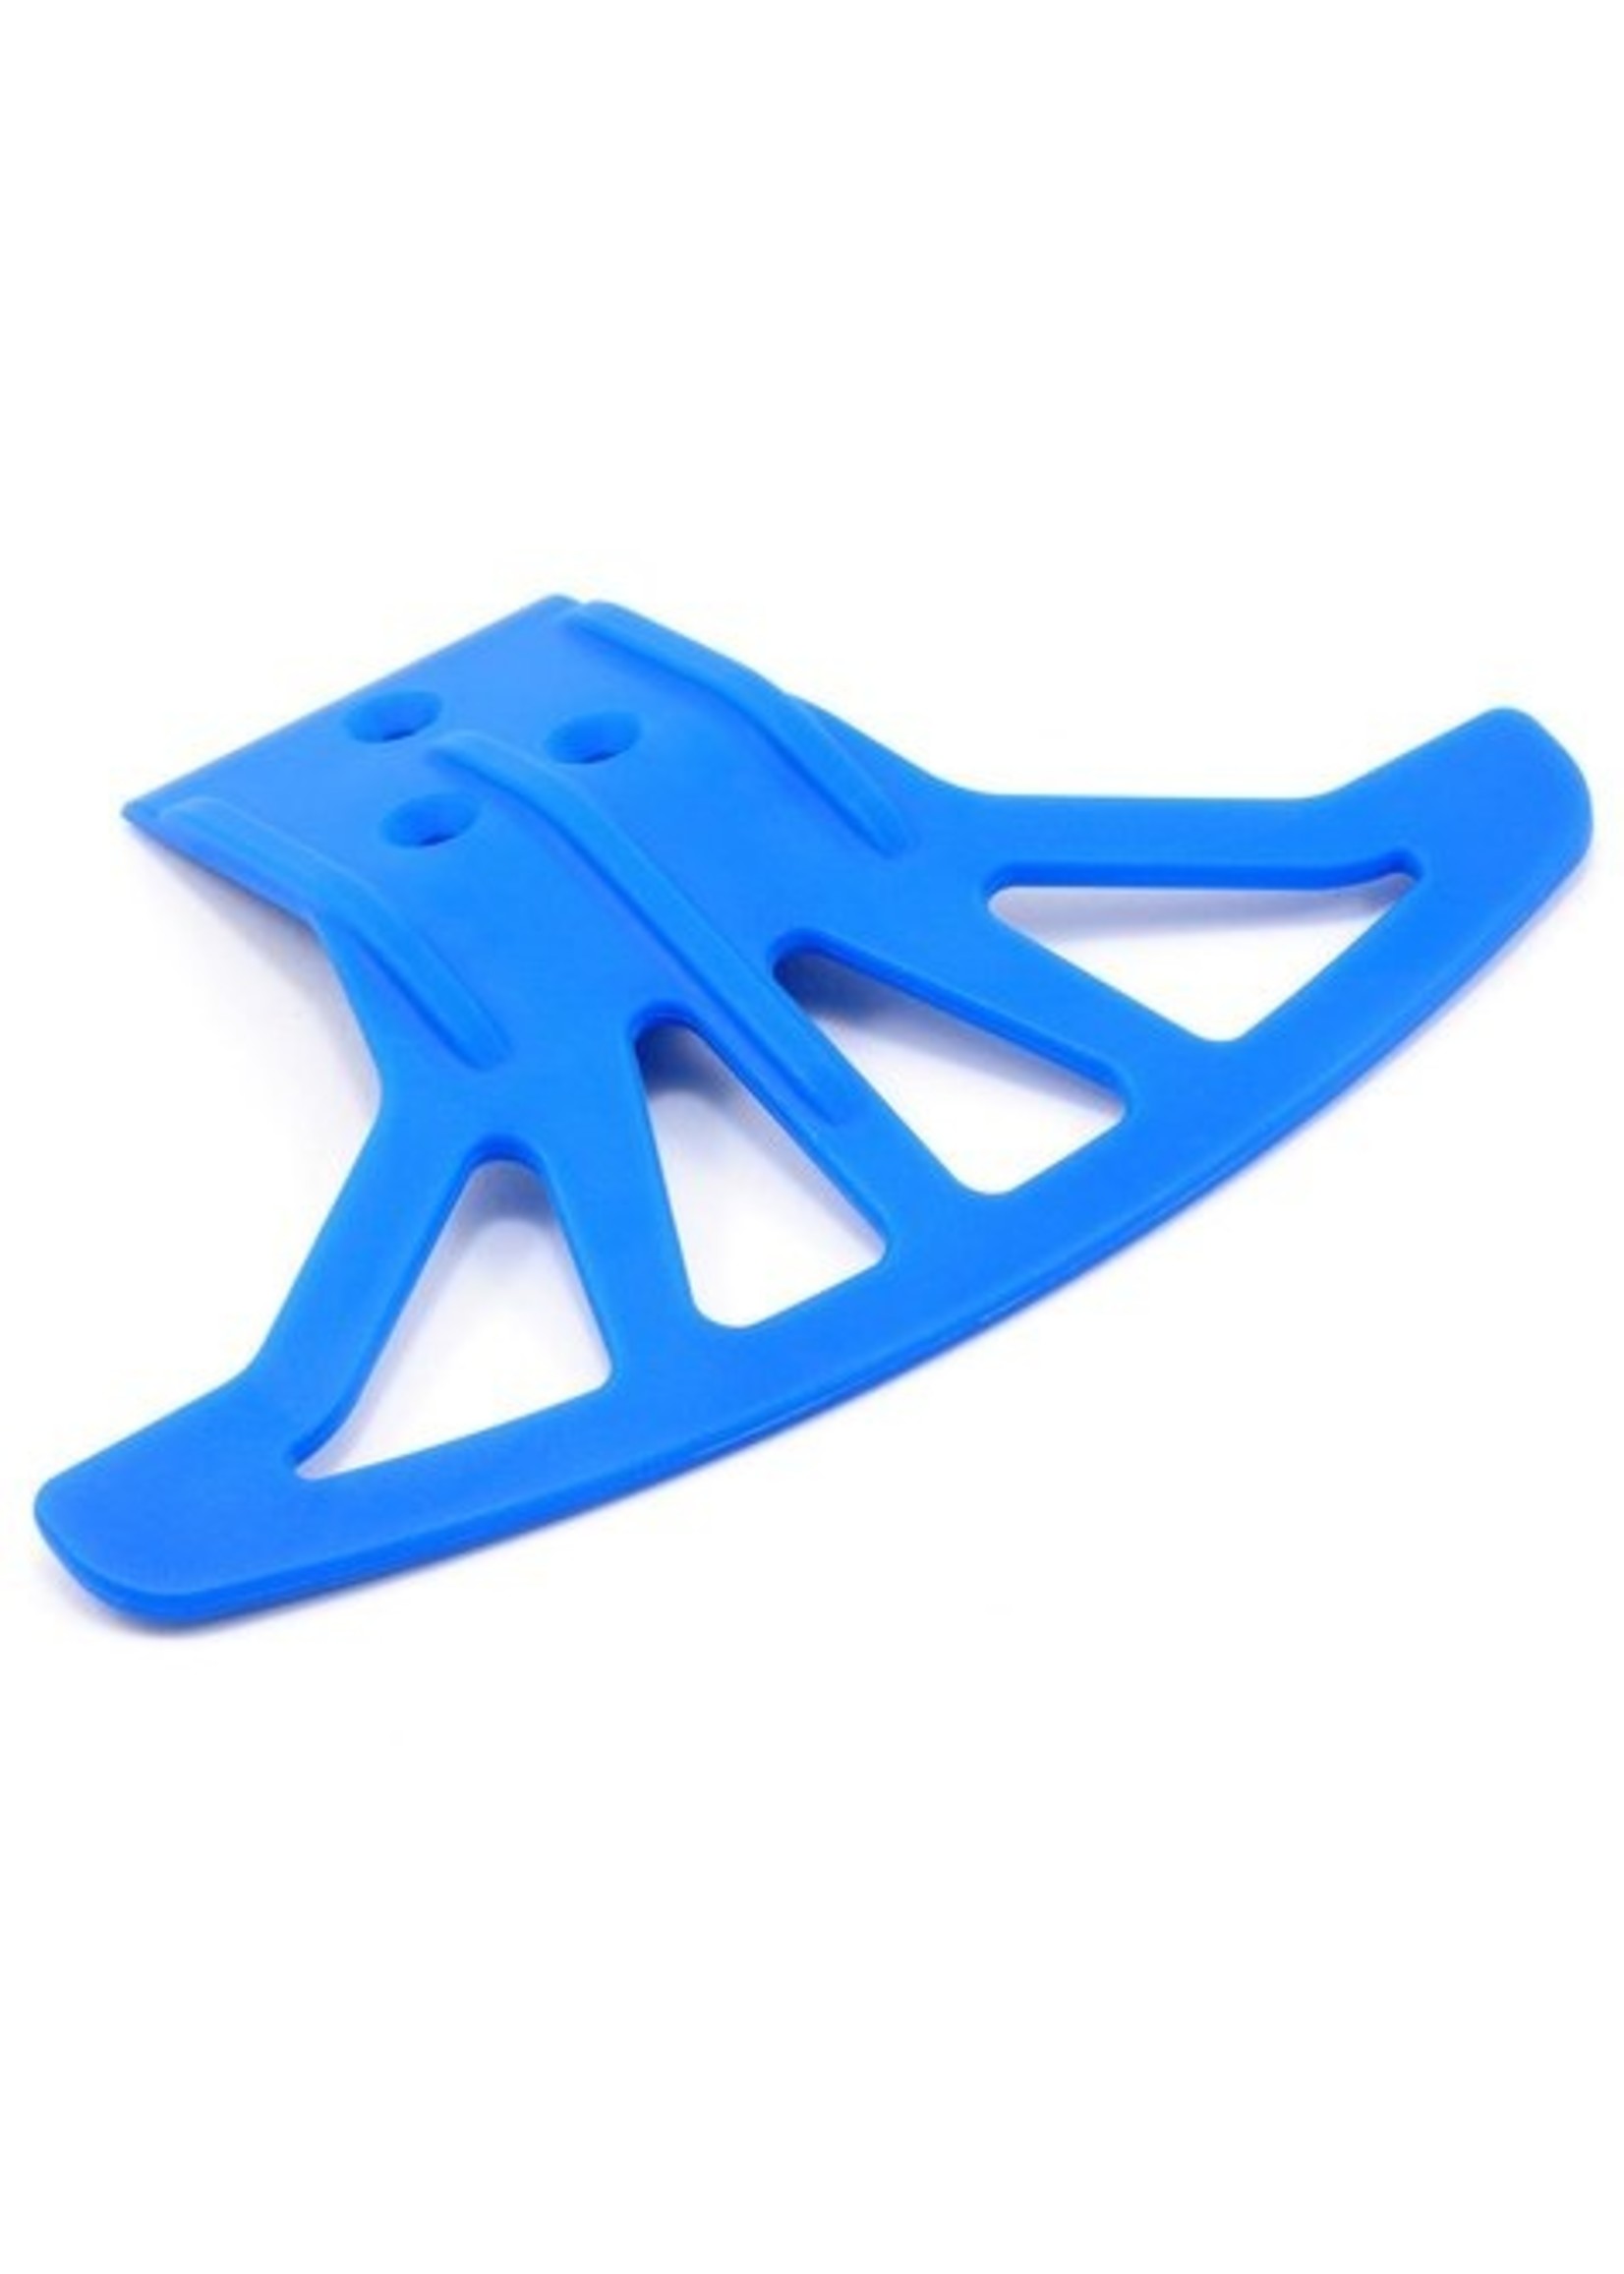 RPM RPM81045 RPM Wide Front Bumper, for Traxxas Stampede 4x4, Blue